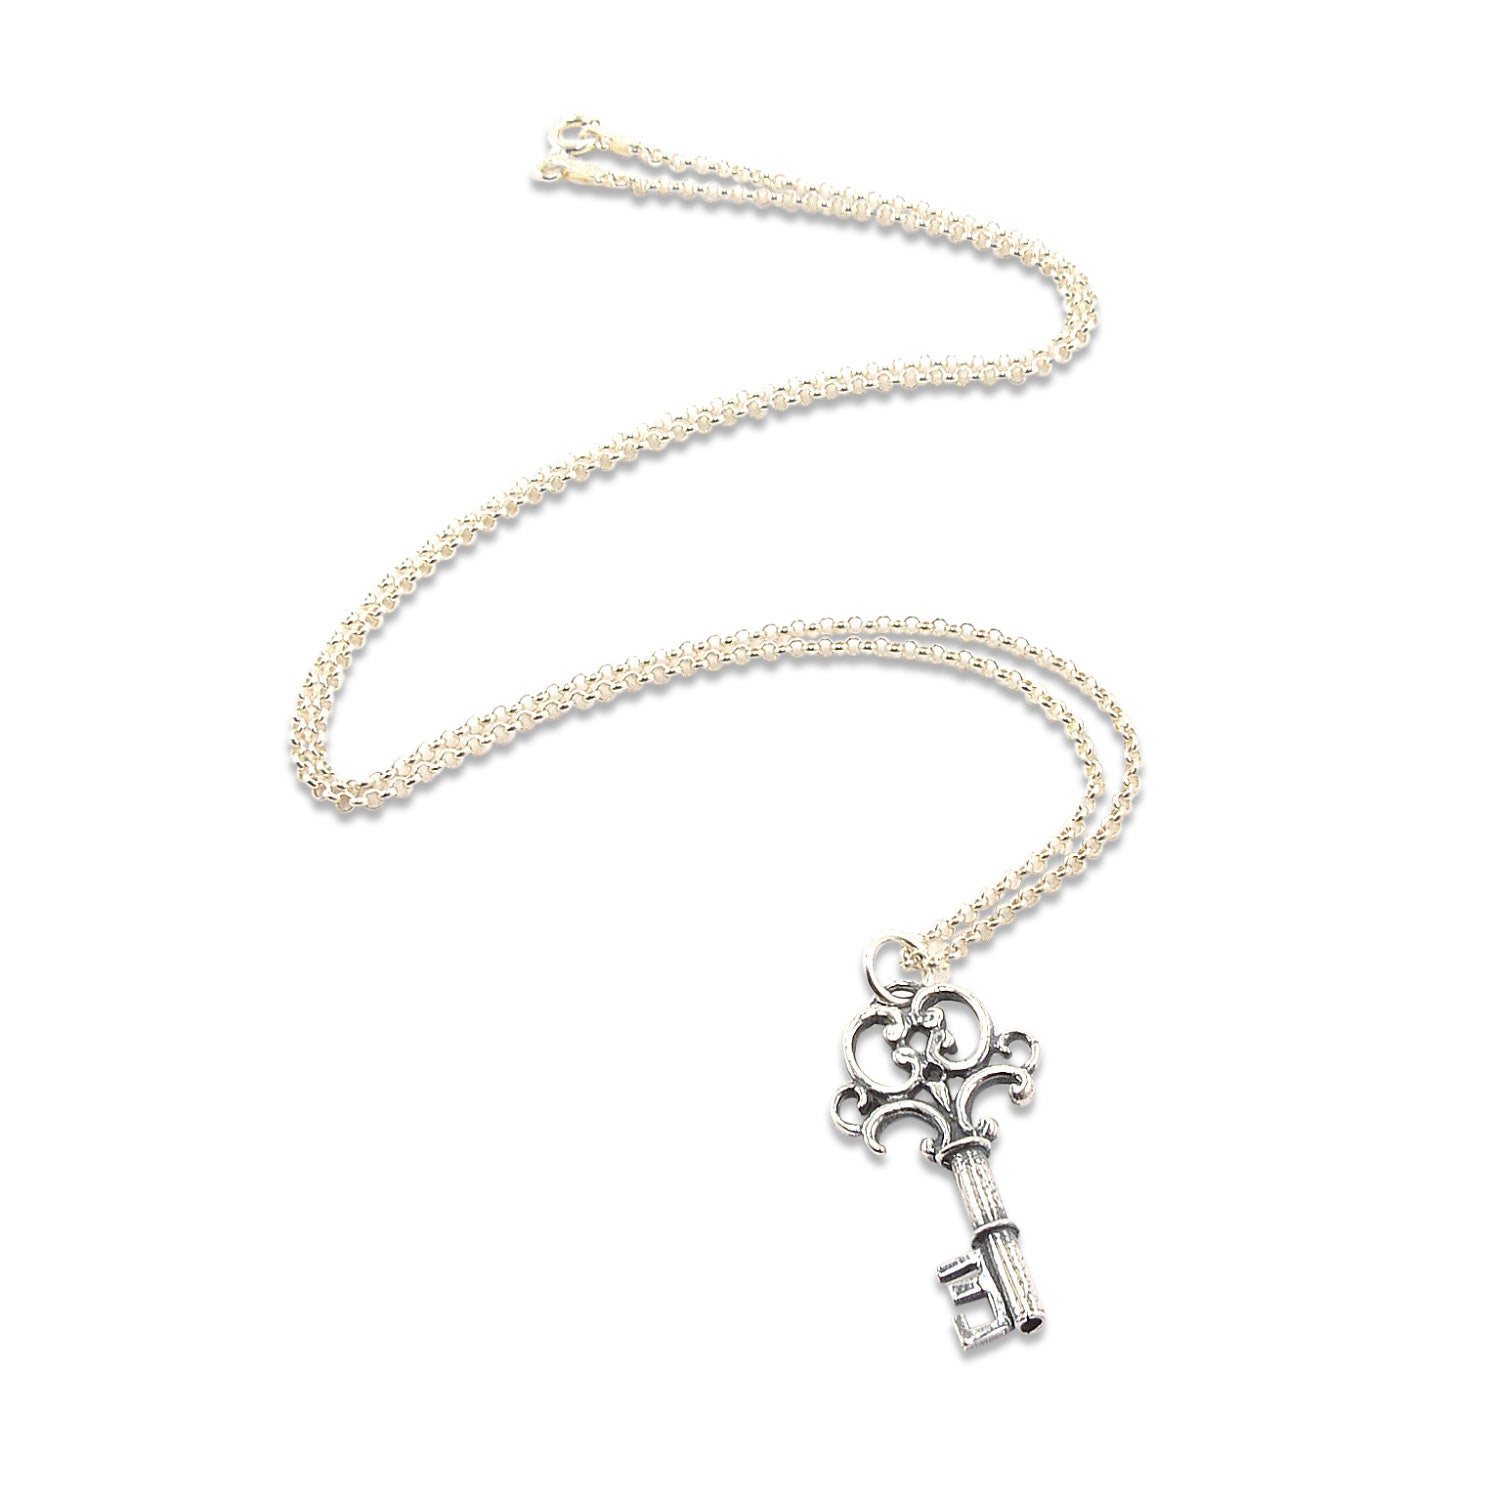 Tiny Skeleton Key Necklace - Gwen Delicious Jewelry Designs